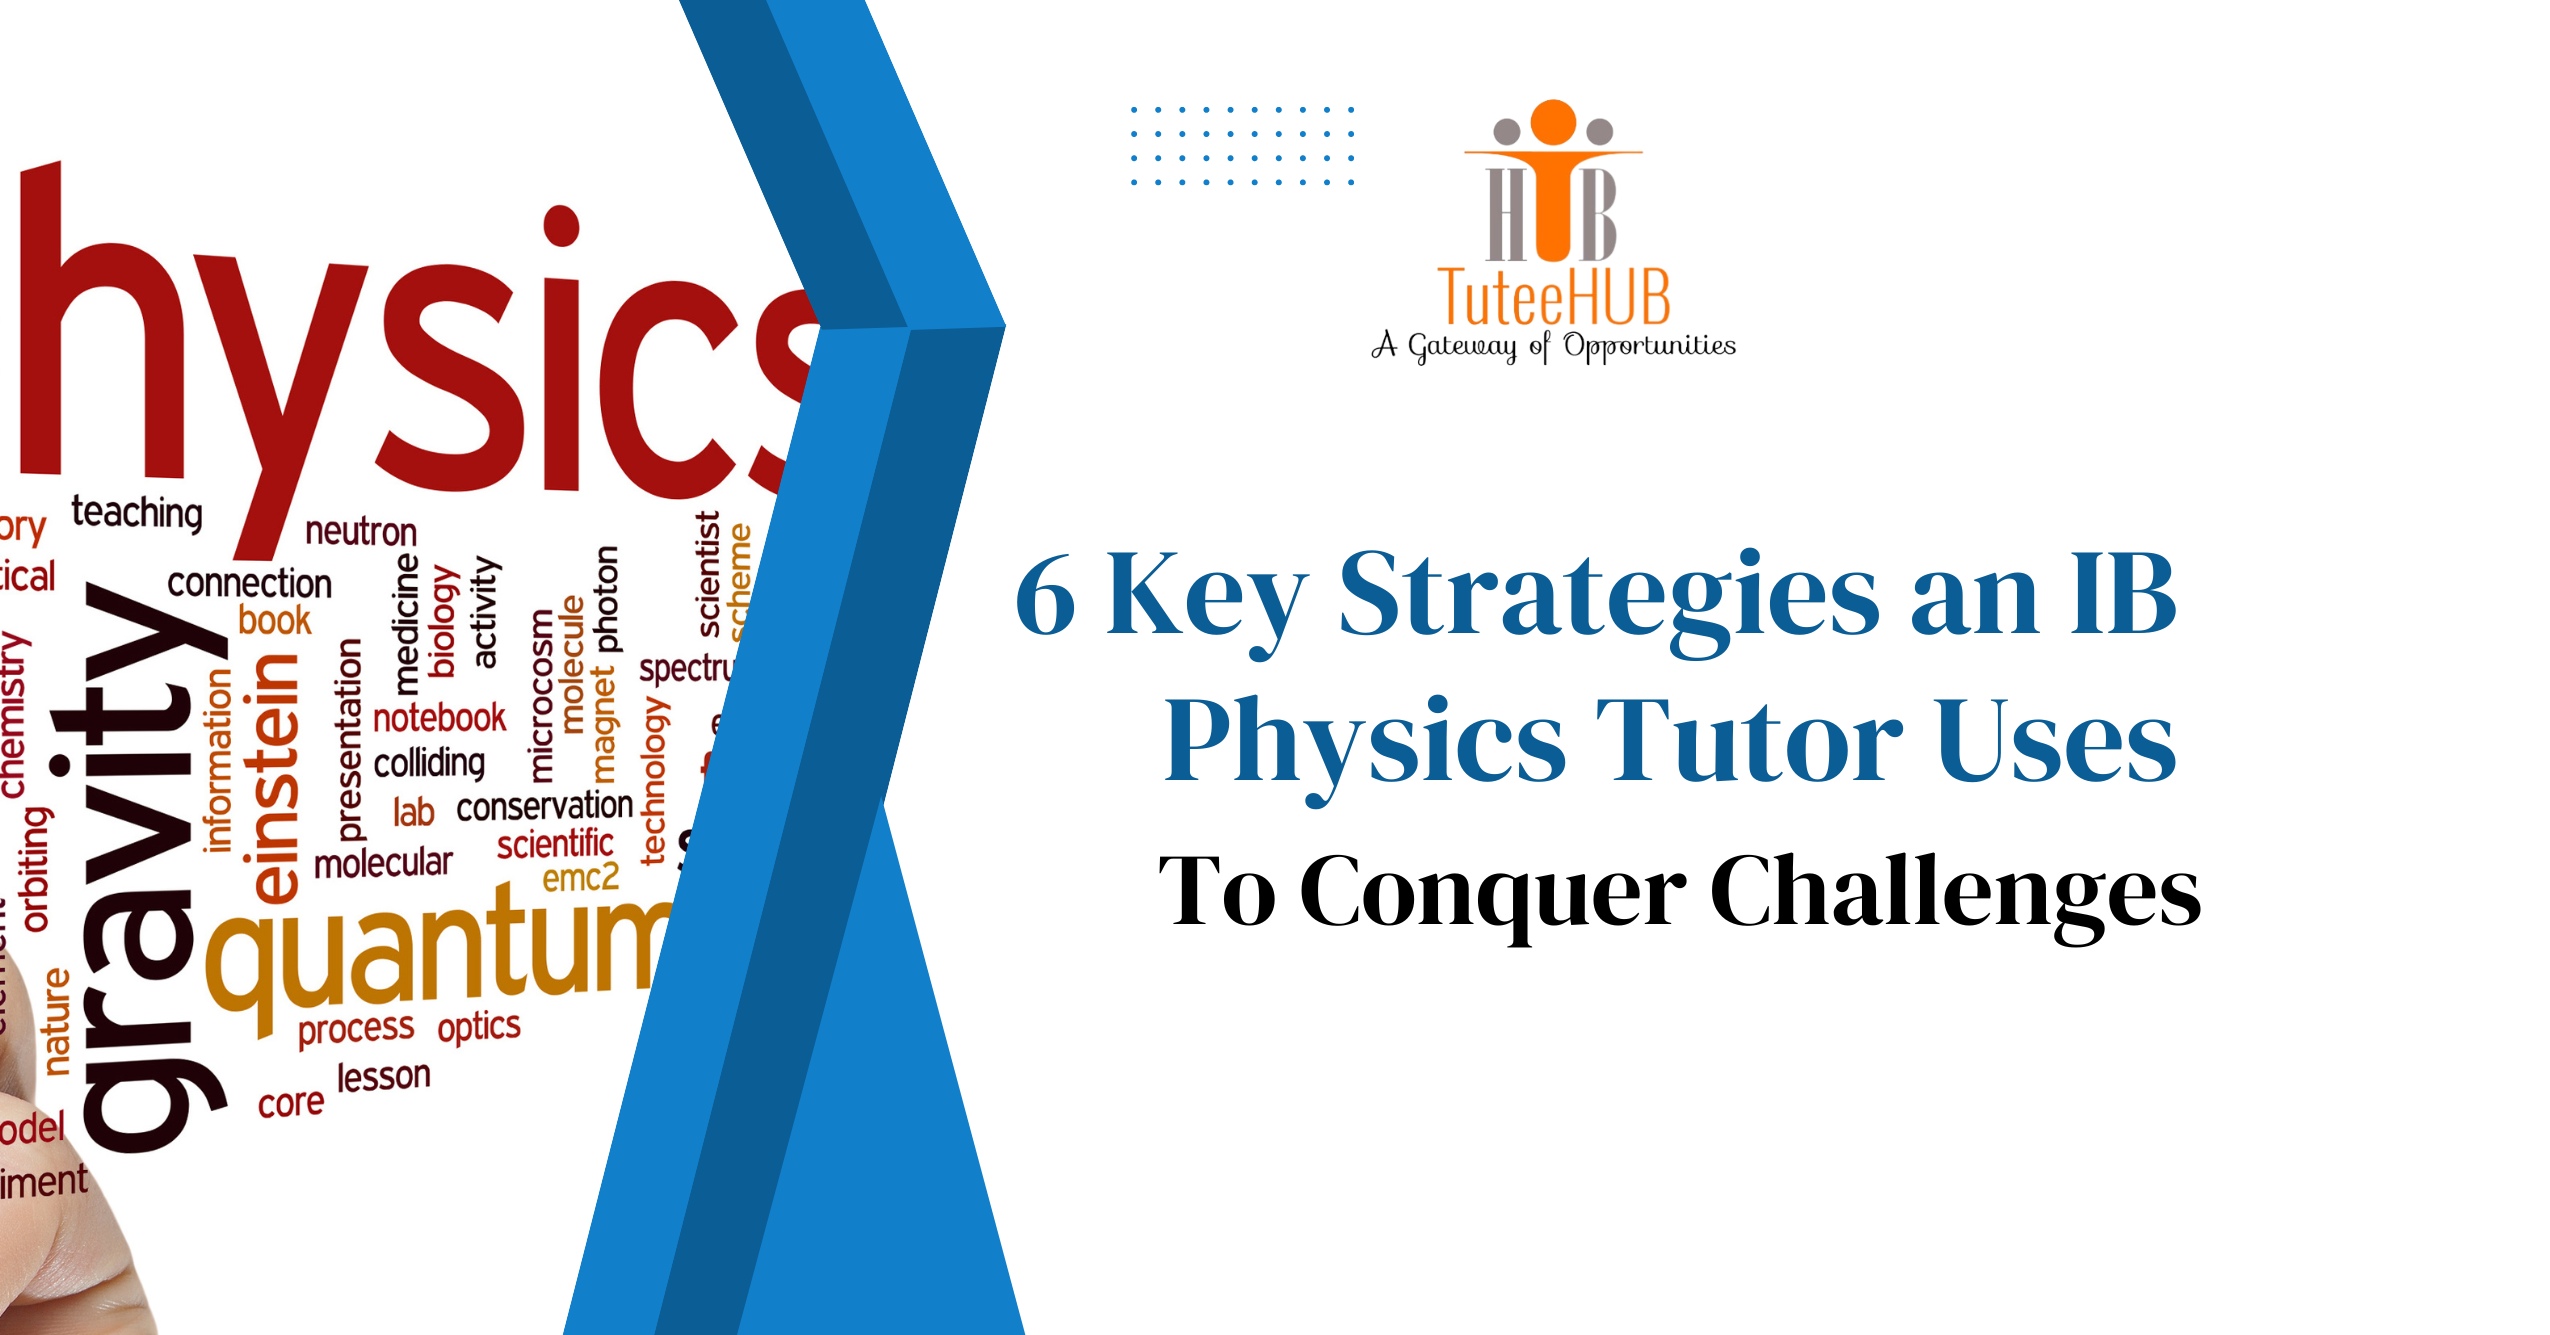 1 6 Key Strategies an IB Physics Tutor Uses to Conquer Challenges